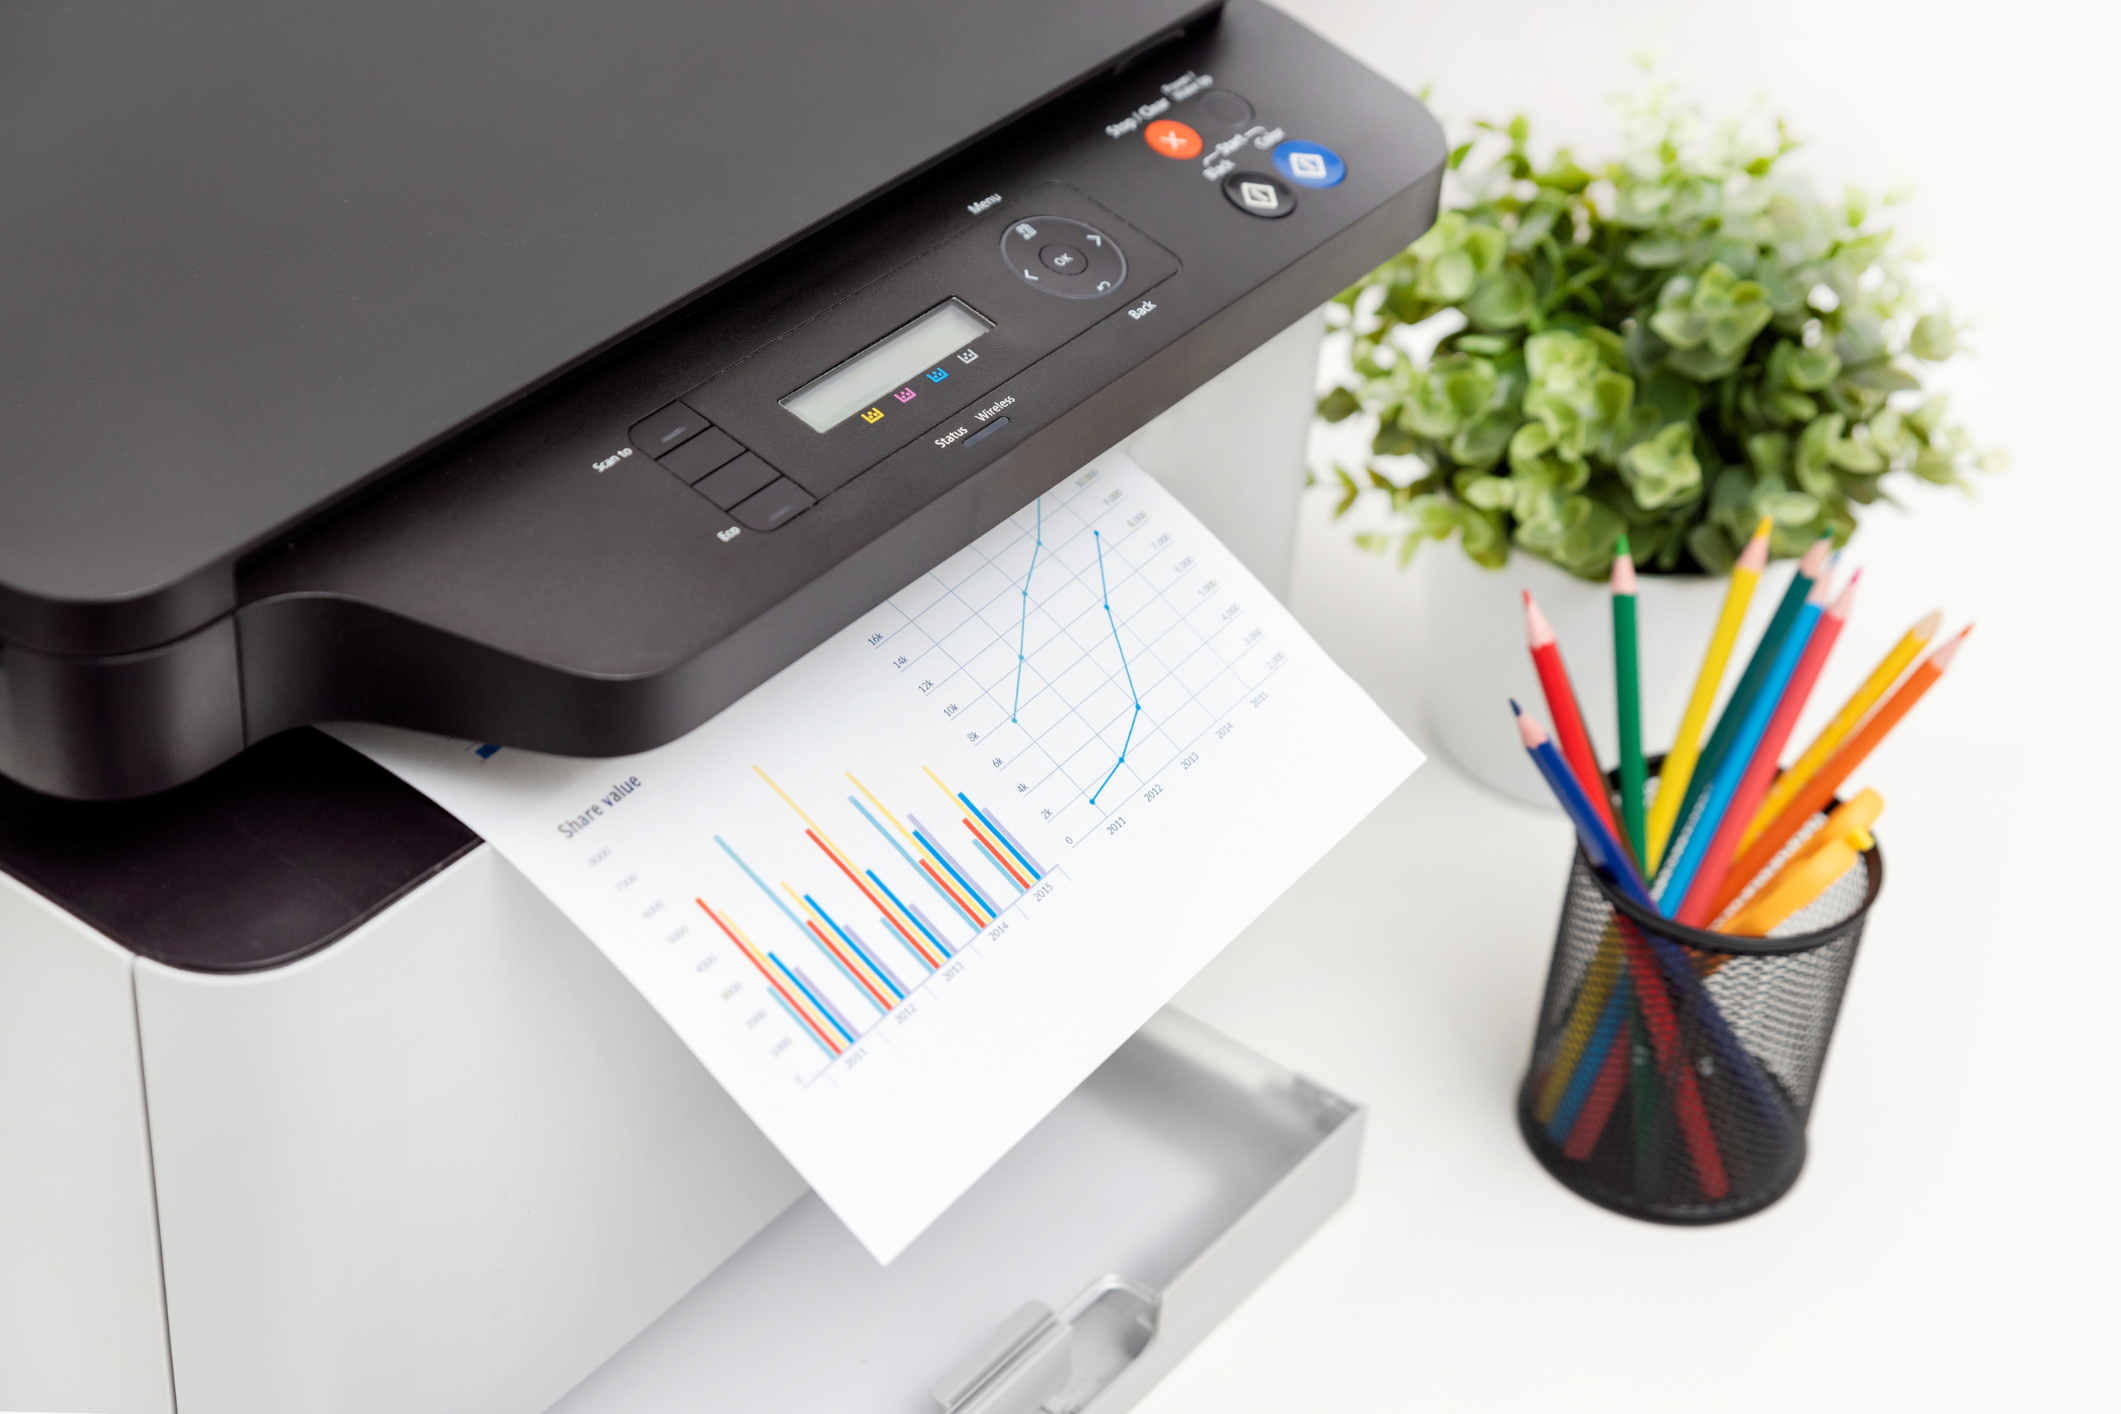 close up of a business printer printing a colorful output of graphs with colored pencils and a plant nearby